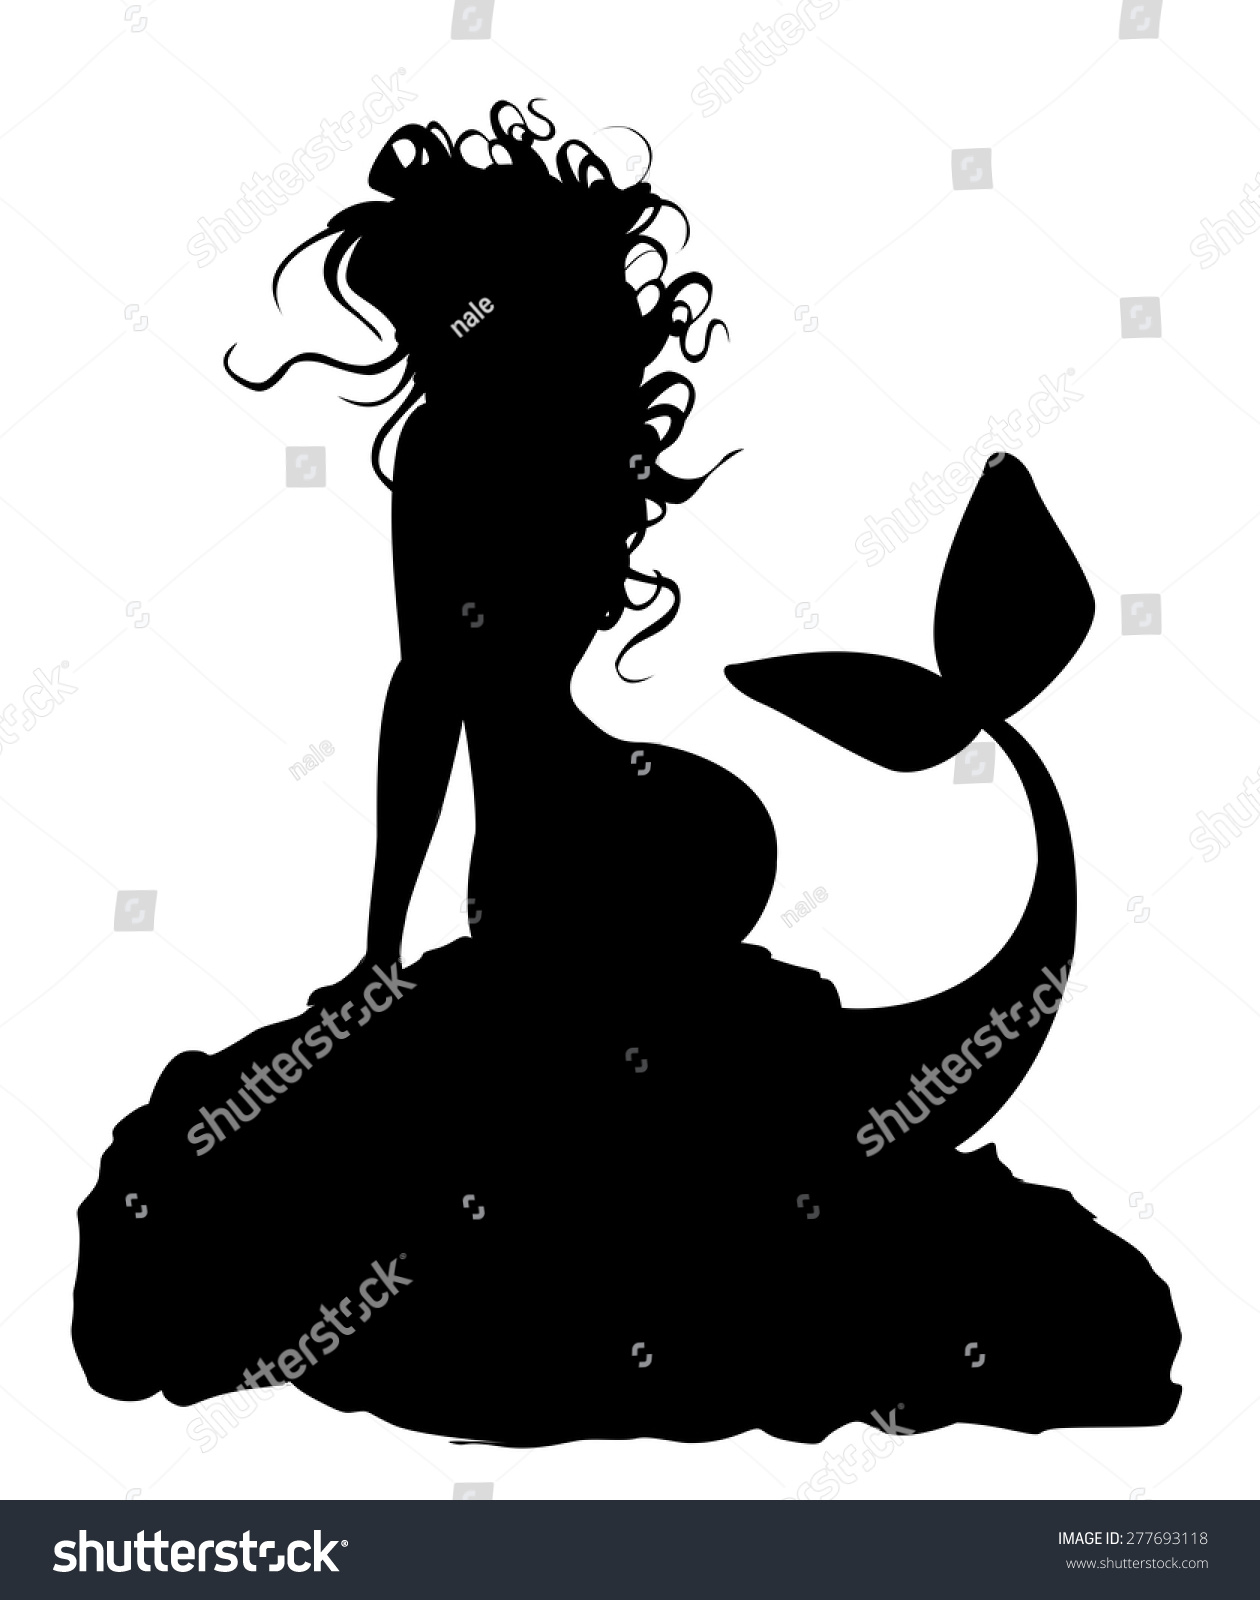 Download Vector illustration of mermaid's silhouette - Royalty Free ...